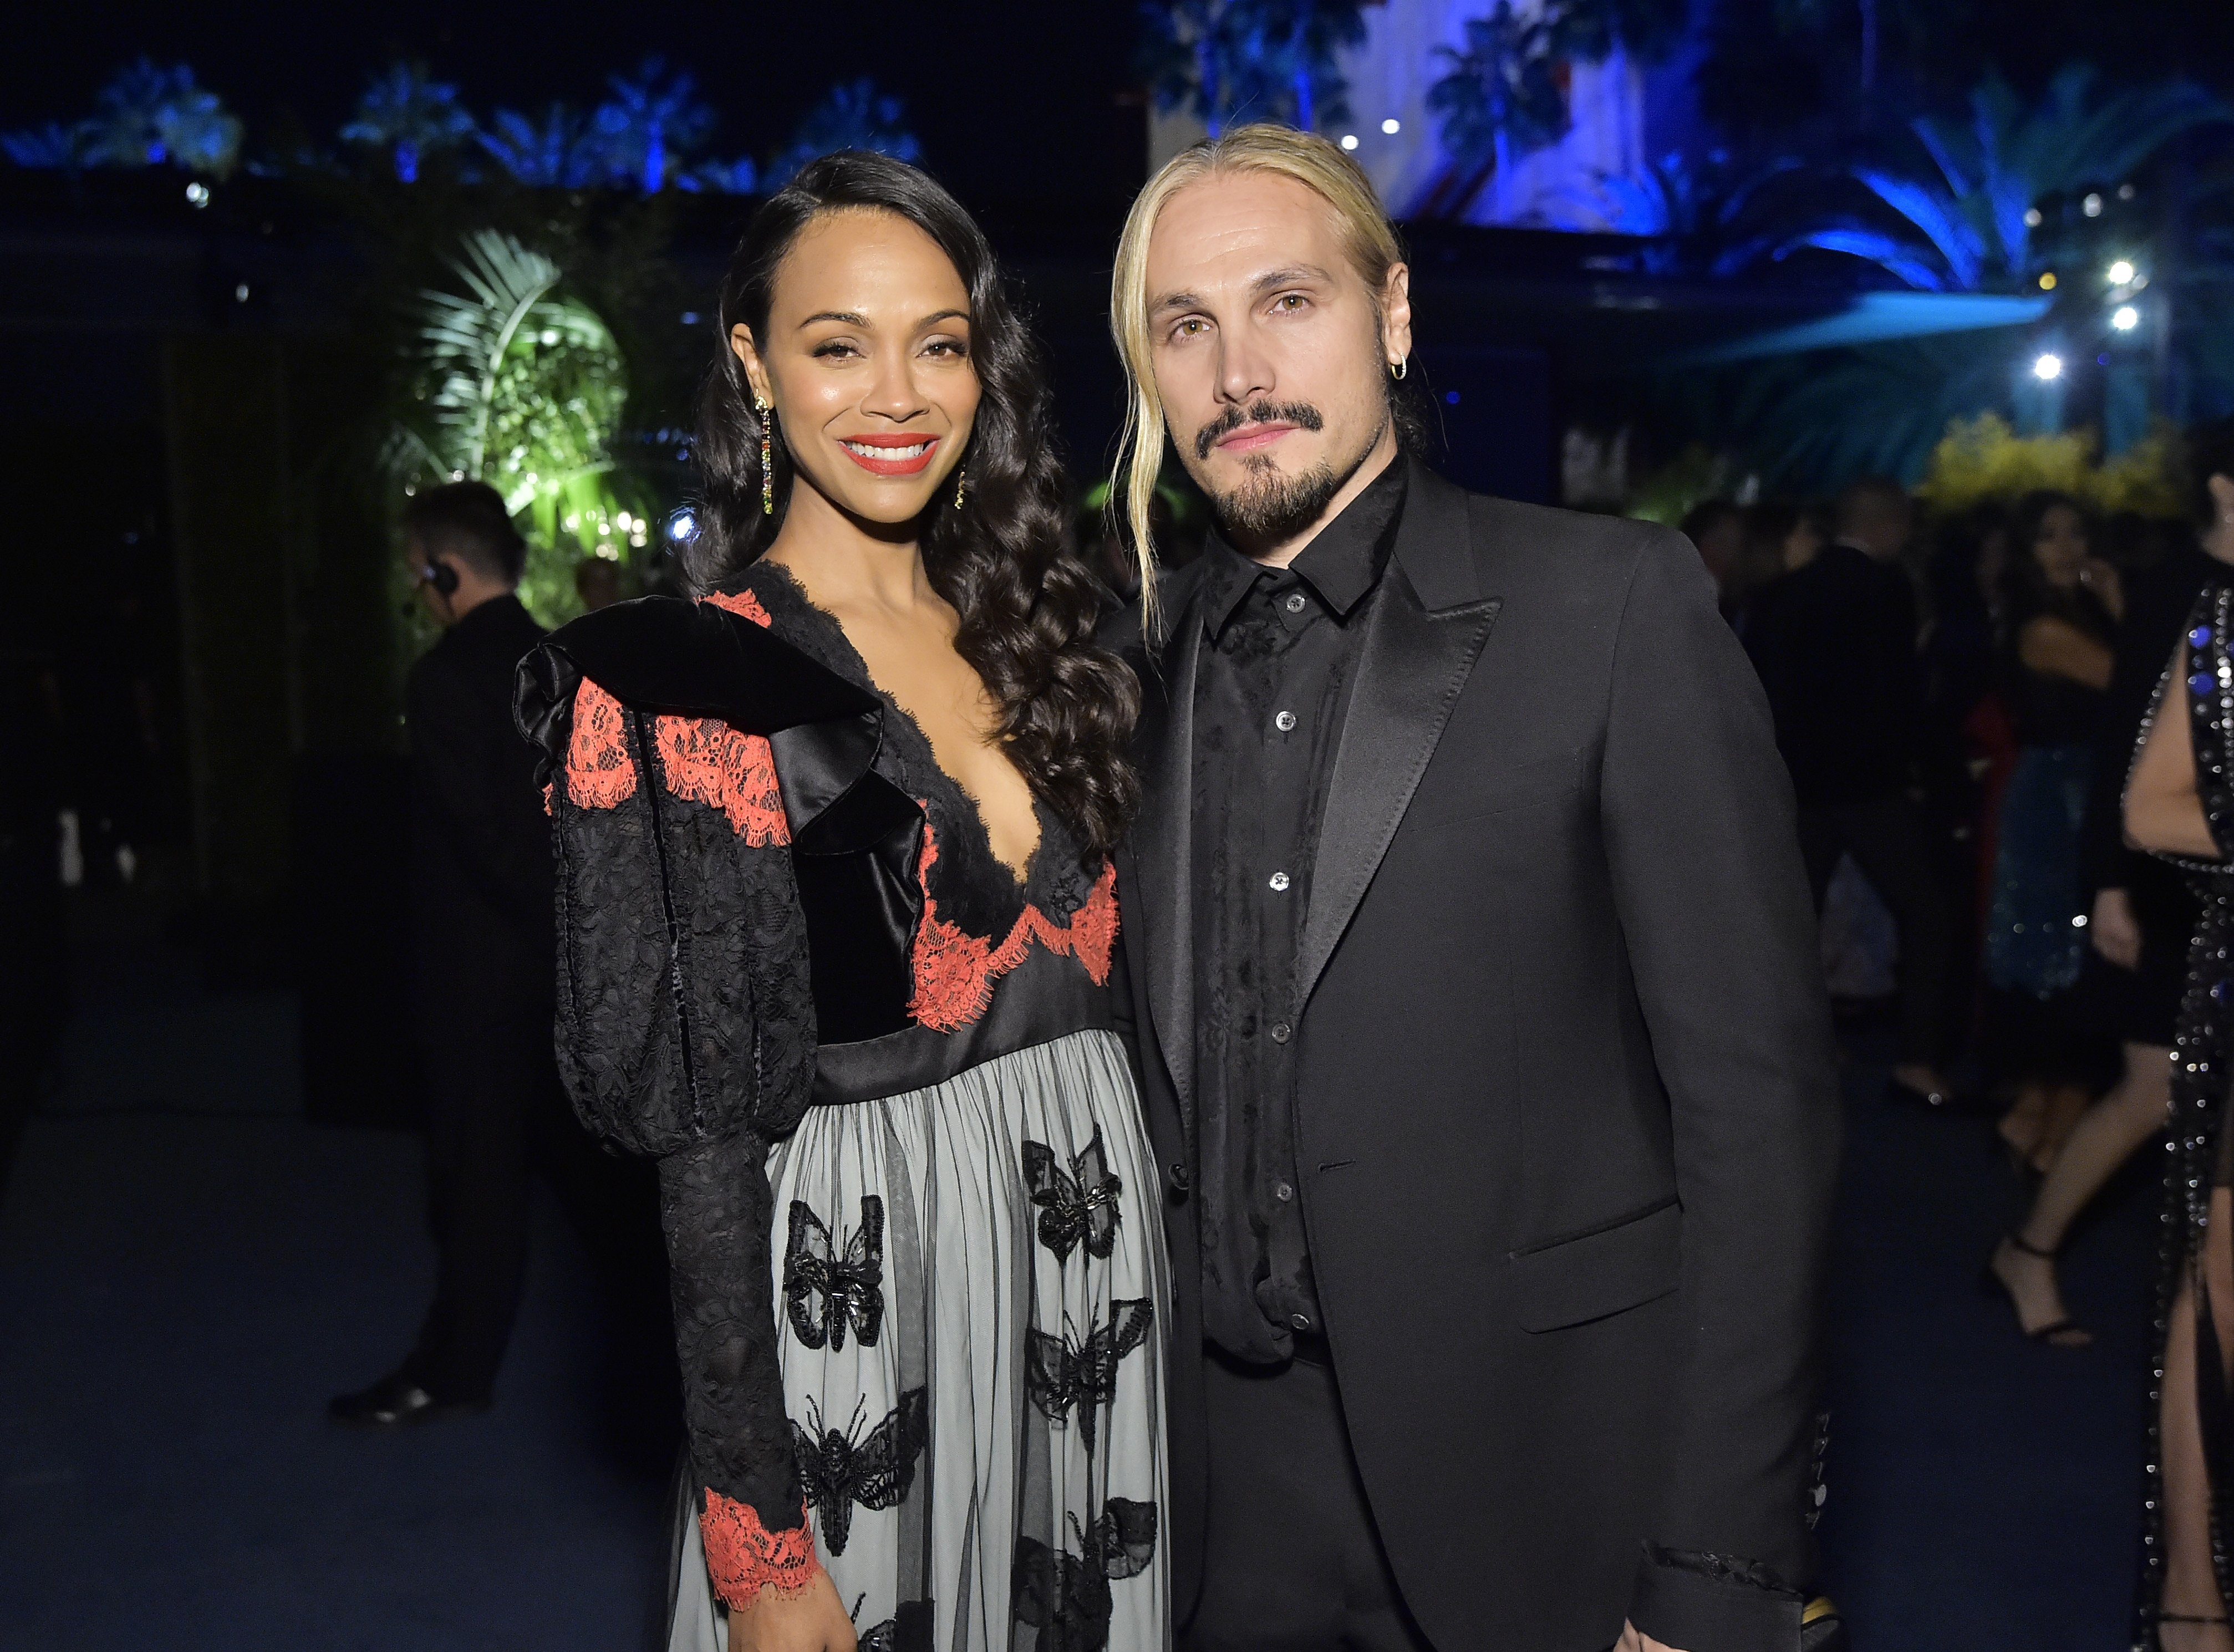 Zoe Saldana and her husband Marco Perego Saldana attend the 2019 LACMA Art + Film Gala Presented By Gucci at LACMA on November 2, 2019, in Los Angeles, California. | Source: Getty Images